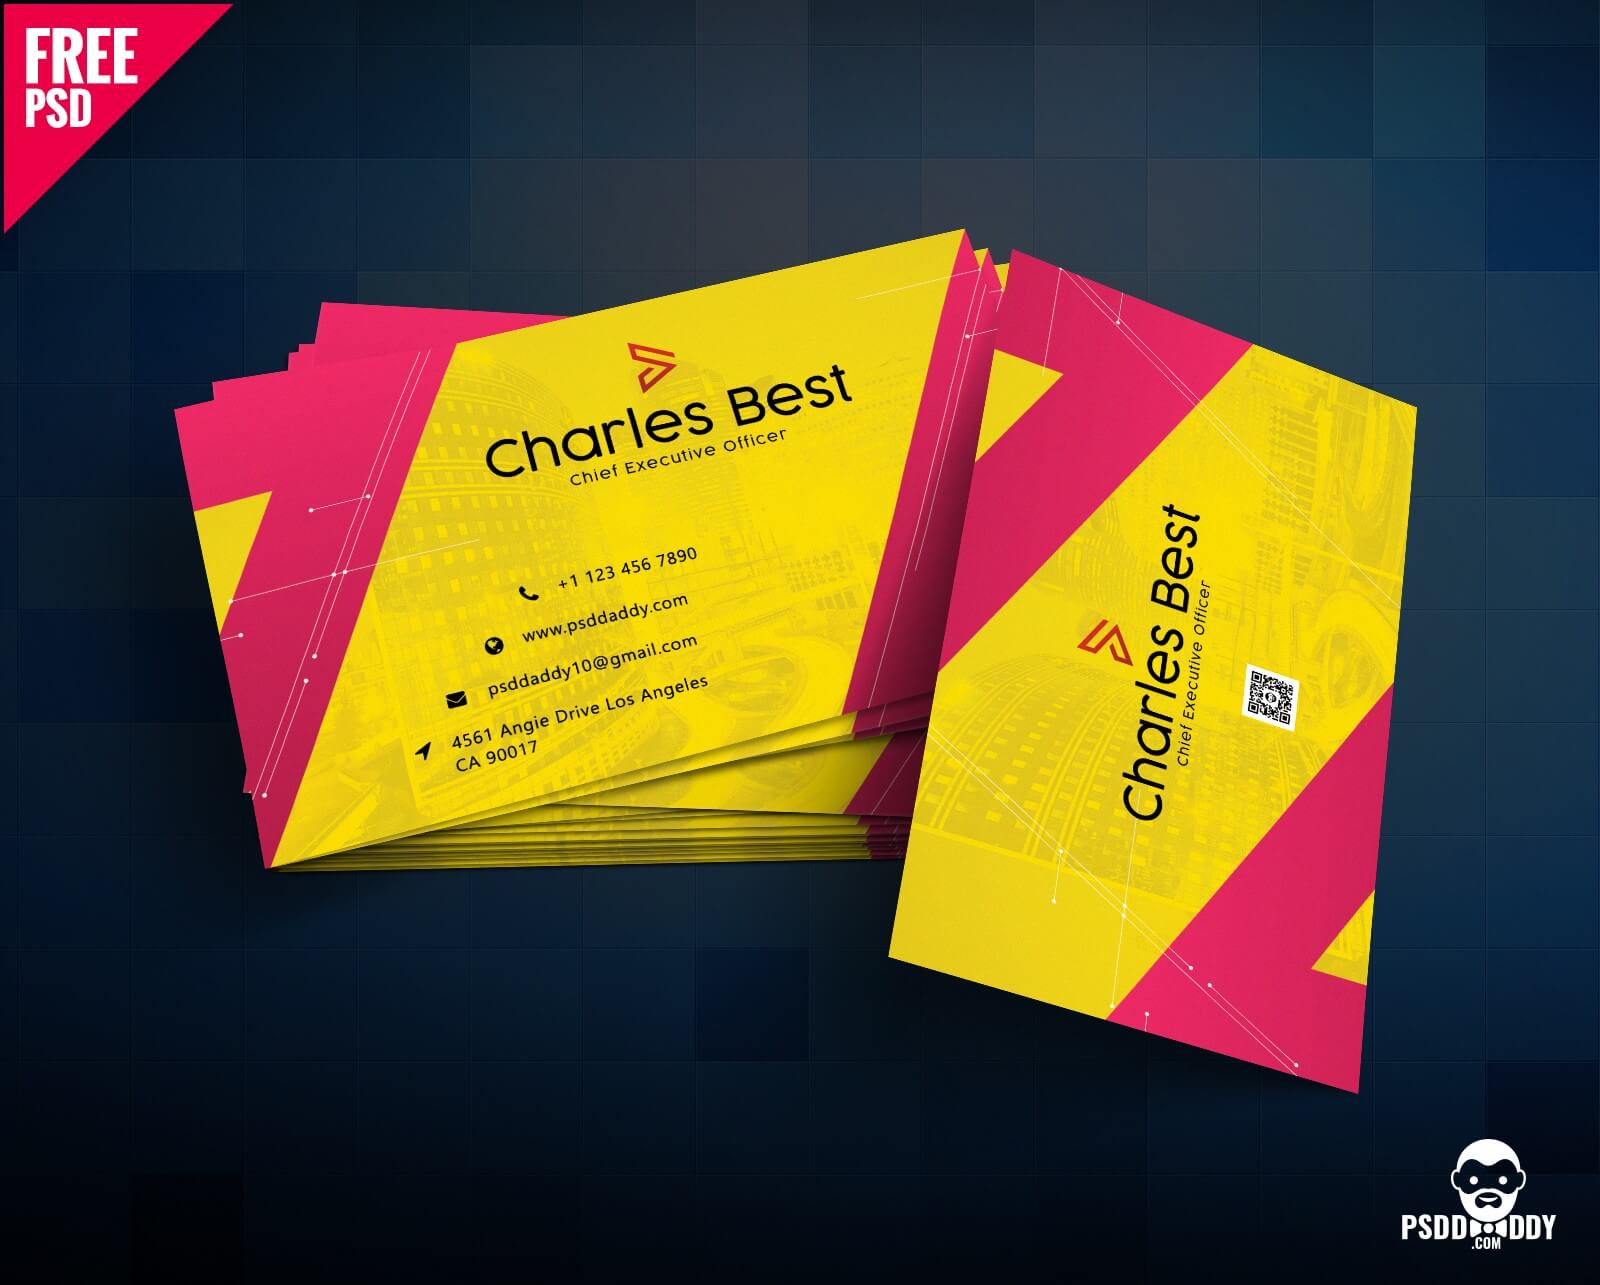 Download] Creative Business Card Free Psd | Psddaddy Inside Calling Card Template Psd